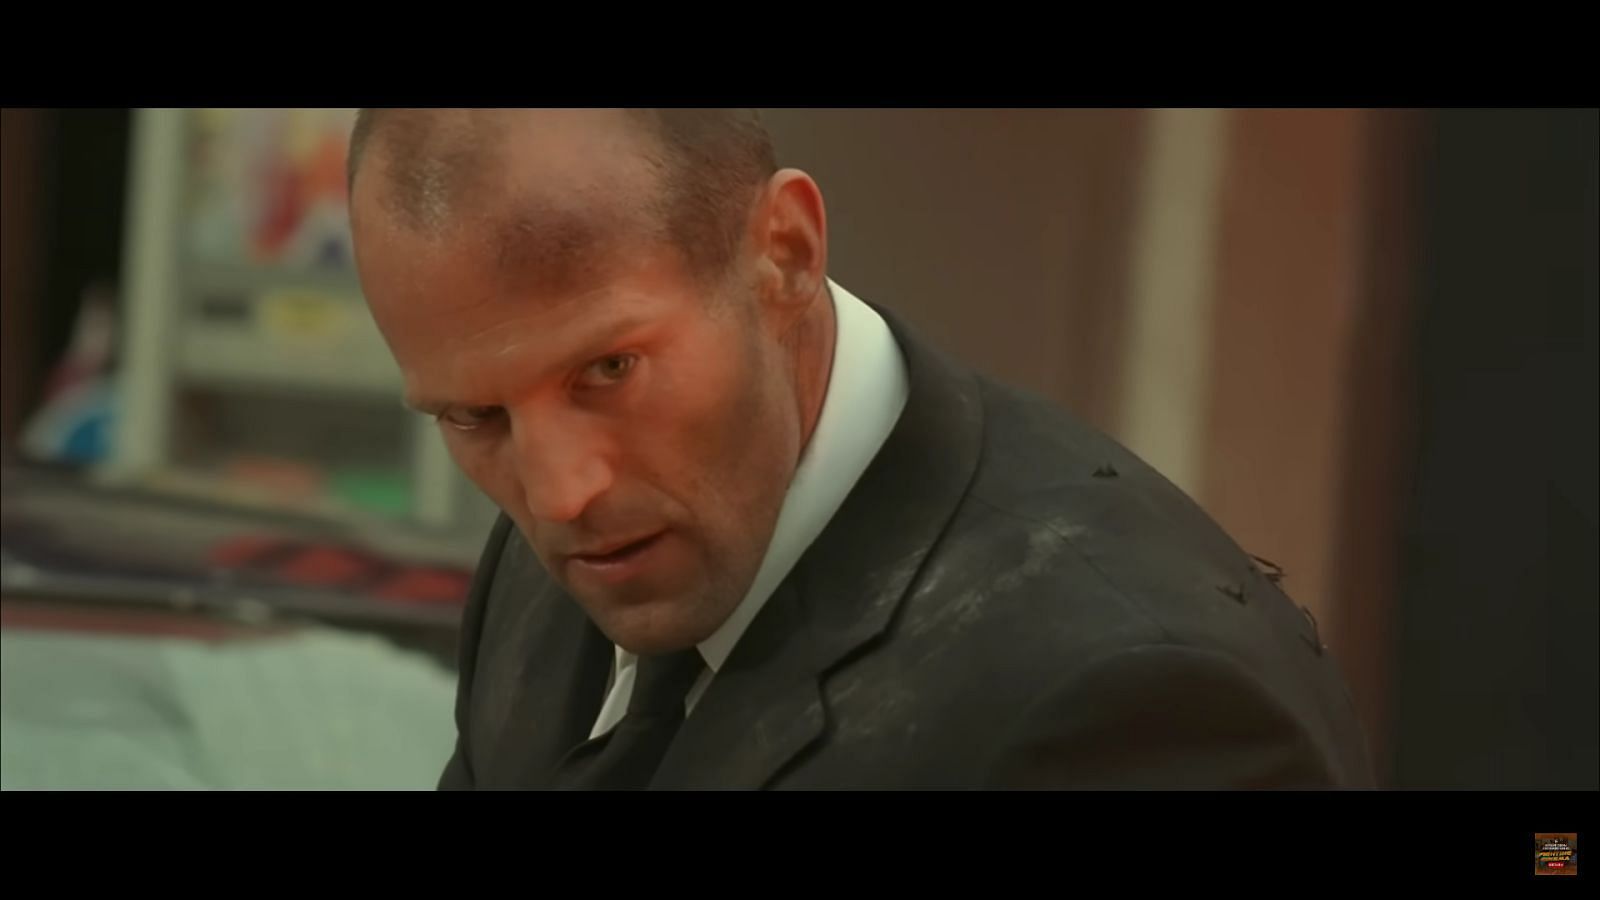 How old is Jason Statham?